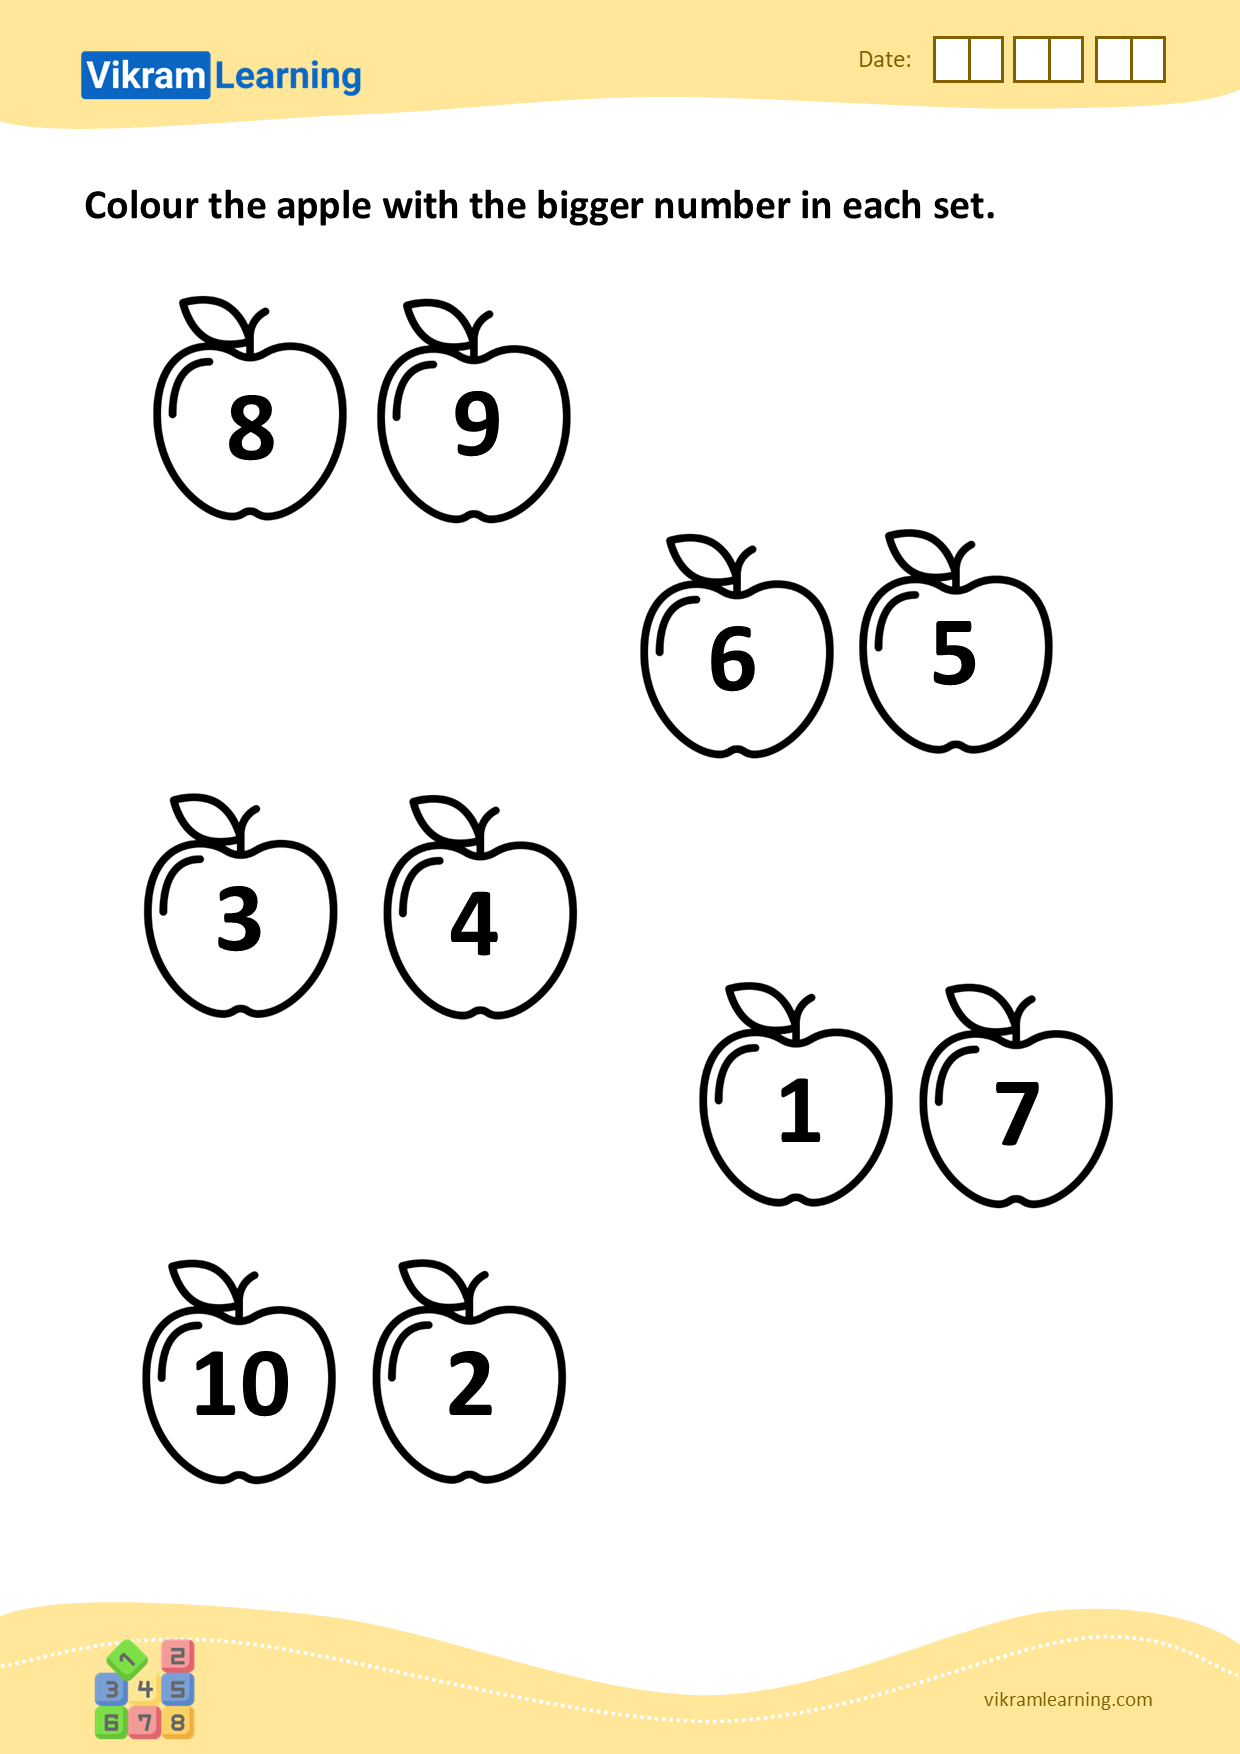 download-colour-the-apple-with-the-bigger-number-in-each-set-worksheets-vikramlearning